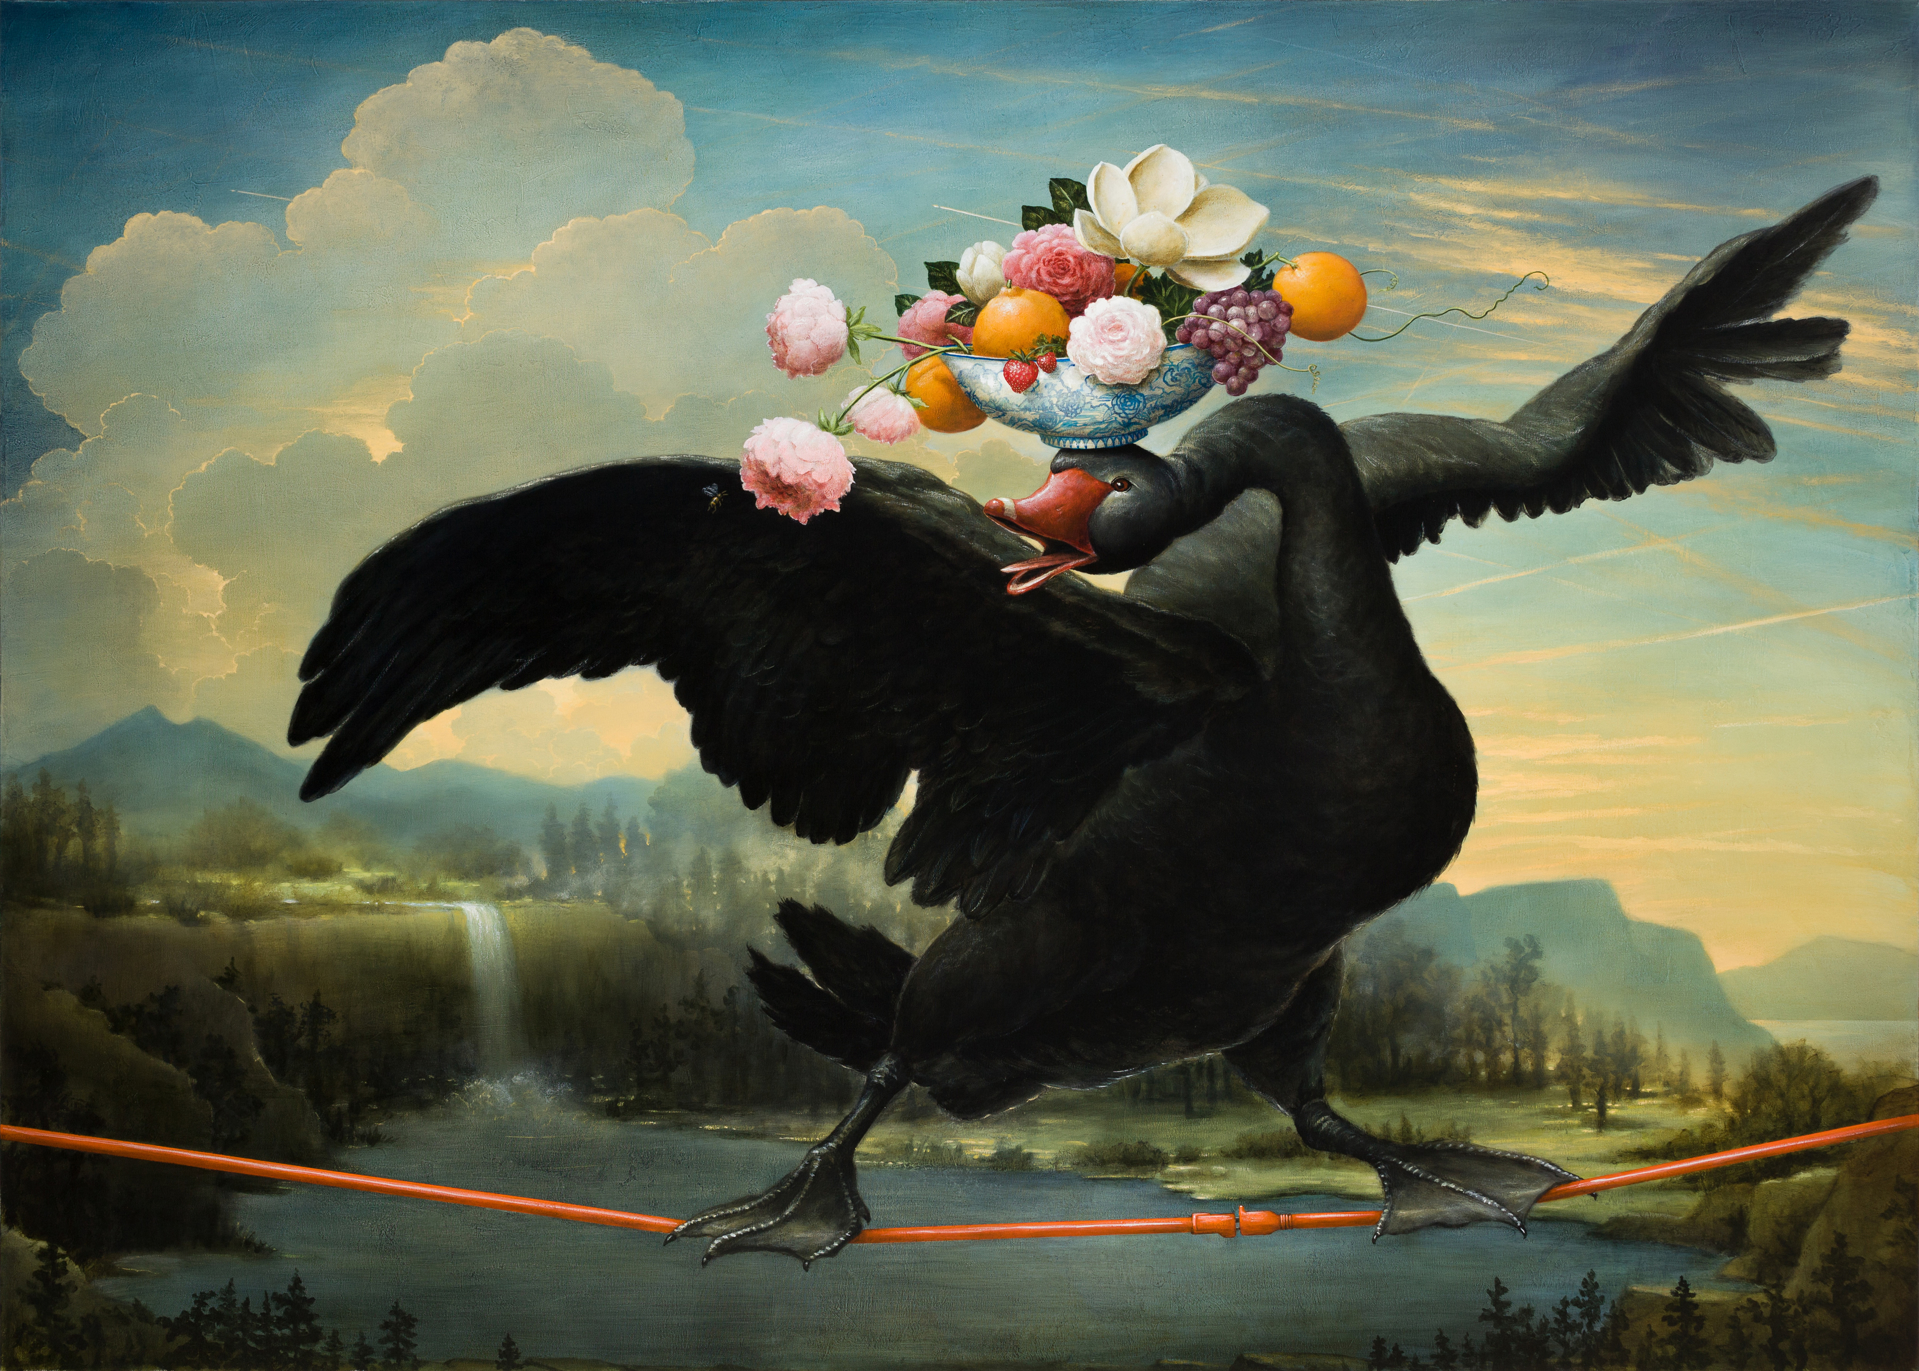 Hubris and Nemesis by Kevin Sloan